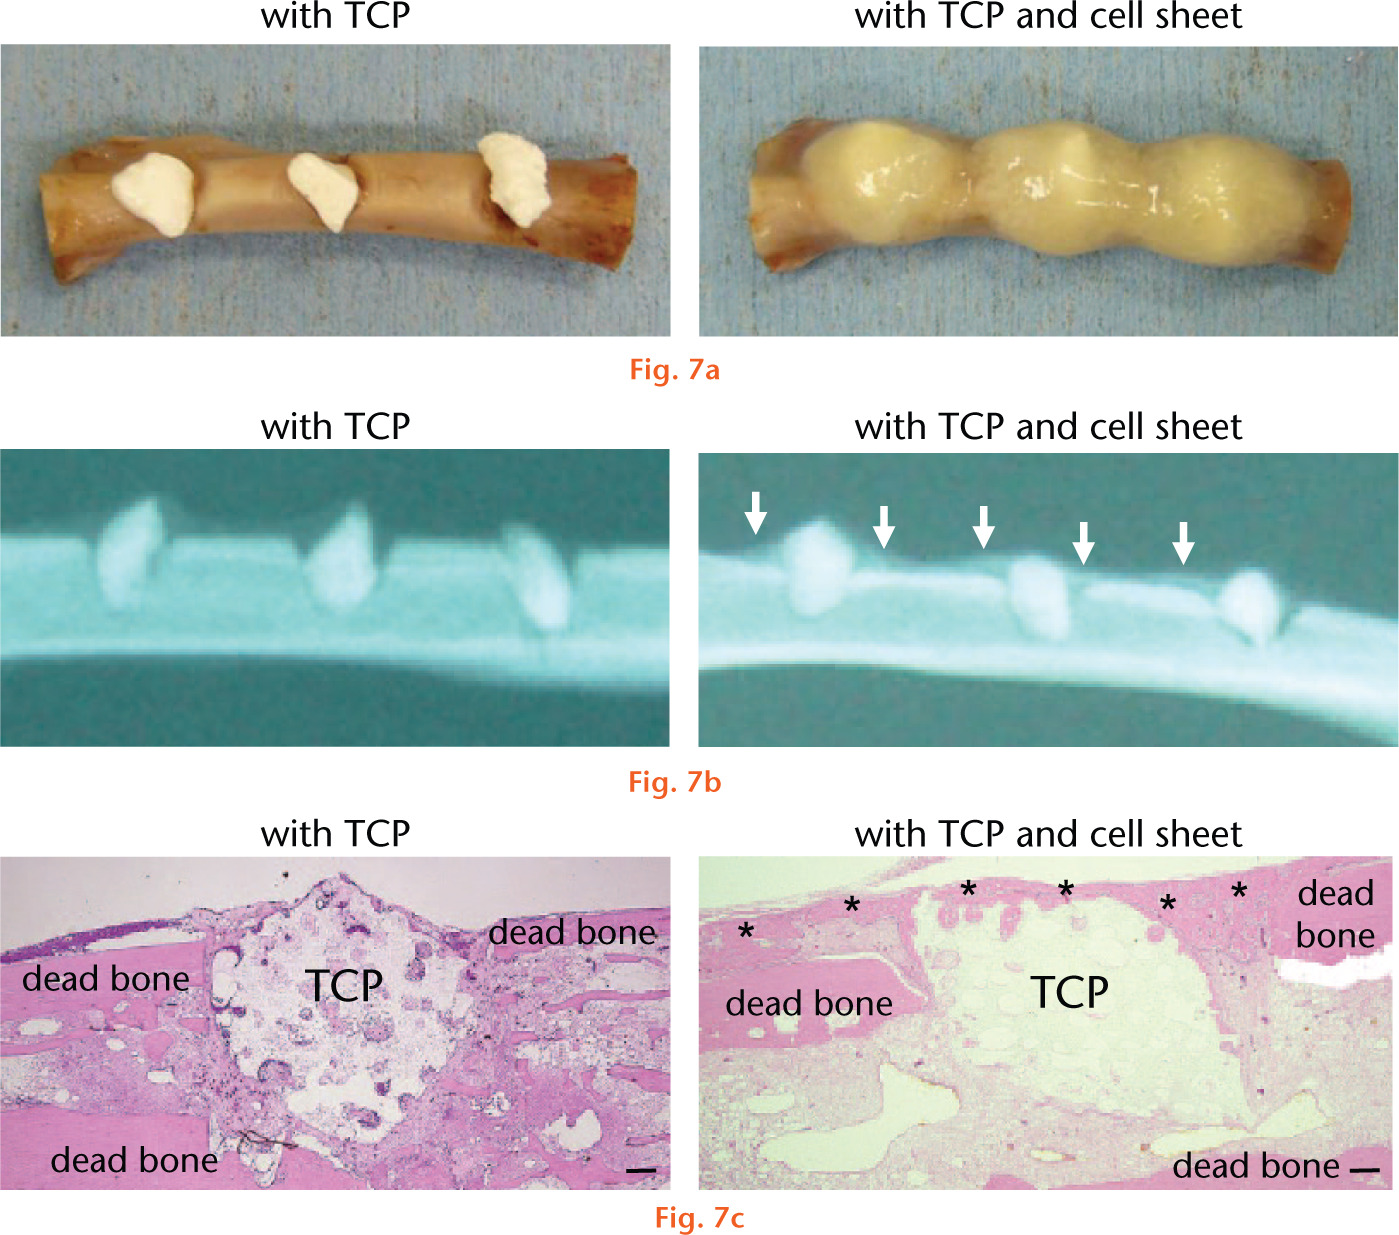  
          Representative images of the dead bone with β- tricalcium phosphate (TCP) samples: a) macroscopic appearance before transplantation; b) the radiograph indicates that calcification was observed around β-TCP in the group treated with β-TCP granules combined with the cell sheet; c) haematoxylin and eosin stained sections showed remarkable bridging bone formation between the β-TCP scaffolds and dead bone in the group treated with β-TCP granules and the cell sheet created in dexamethasone/ascorbic acid phosphate The white arrow indicates calcification (*newly formed bone tissue; bar: 200 μm).
        